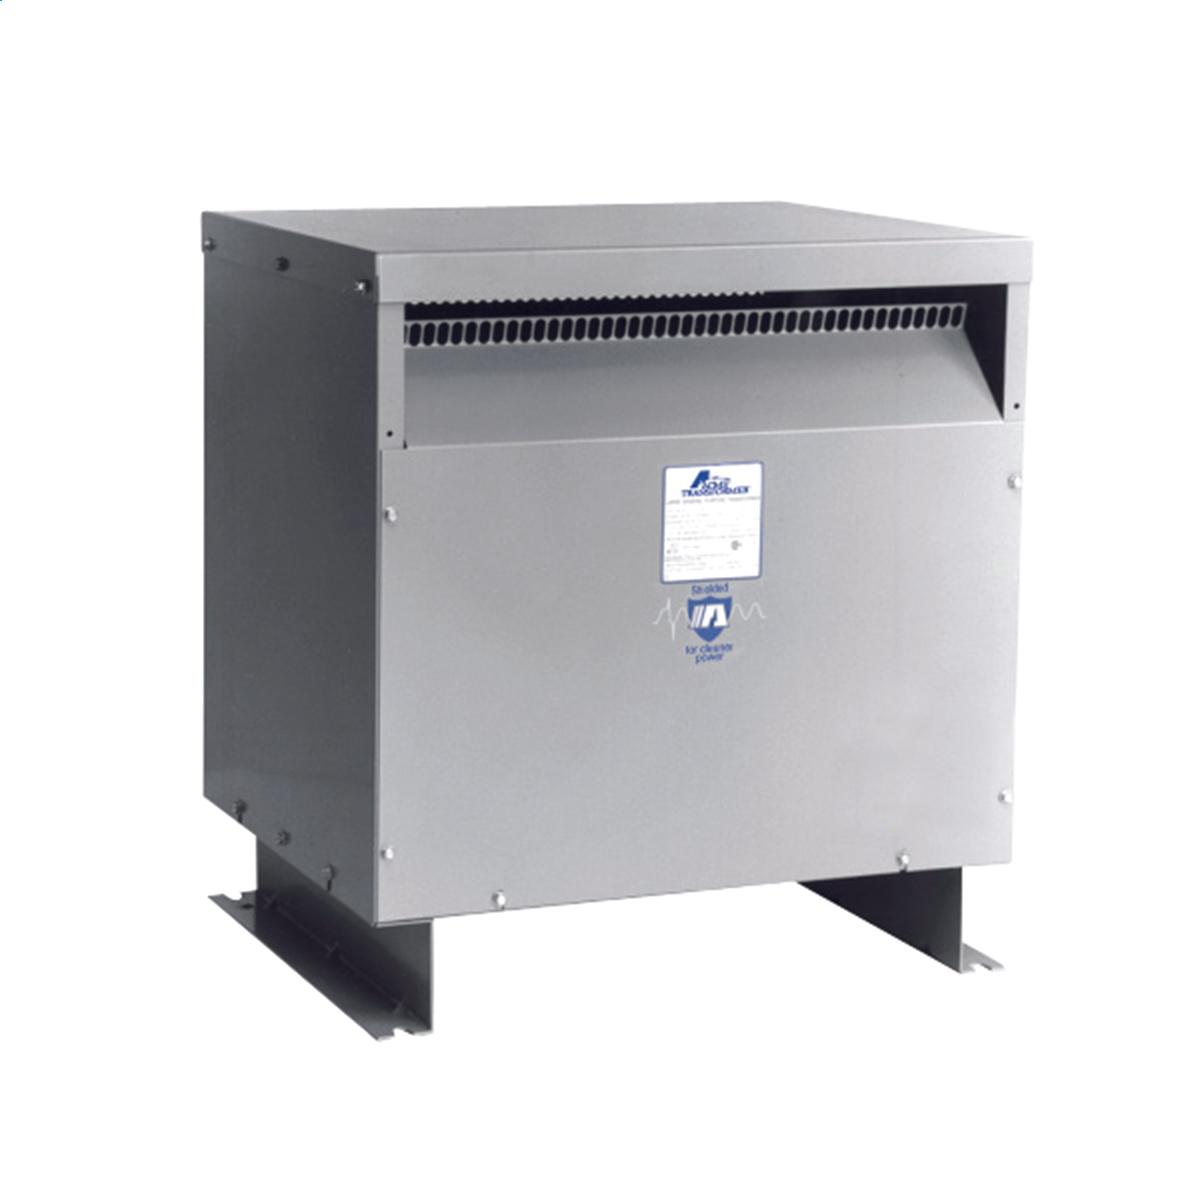 Hubbell WB015K03 Medium Voltage Transformer - Single Phase, 2400 - 600V, 15kVA  ; Lower operating cost over Liquid-filled ; No additional fireproofing or venting ; Long life expectancy ; Smaller, lighter easy to maintain